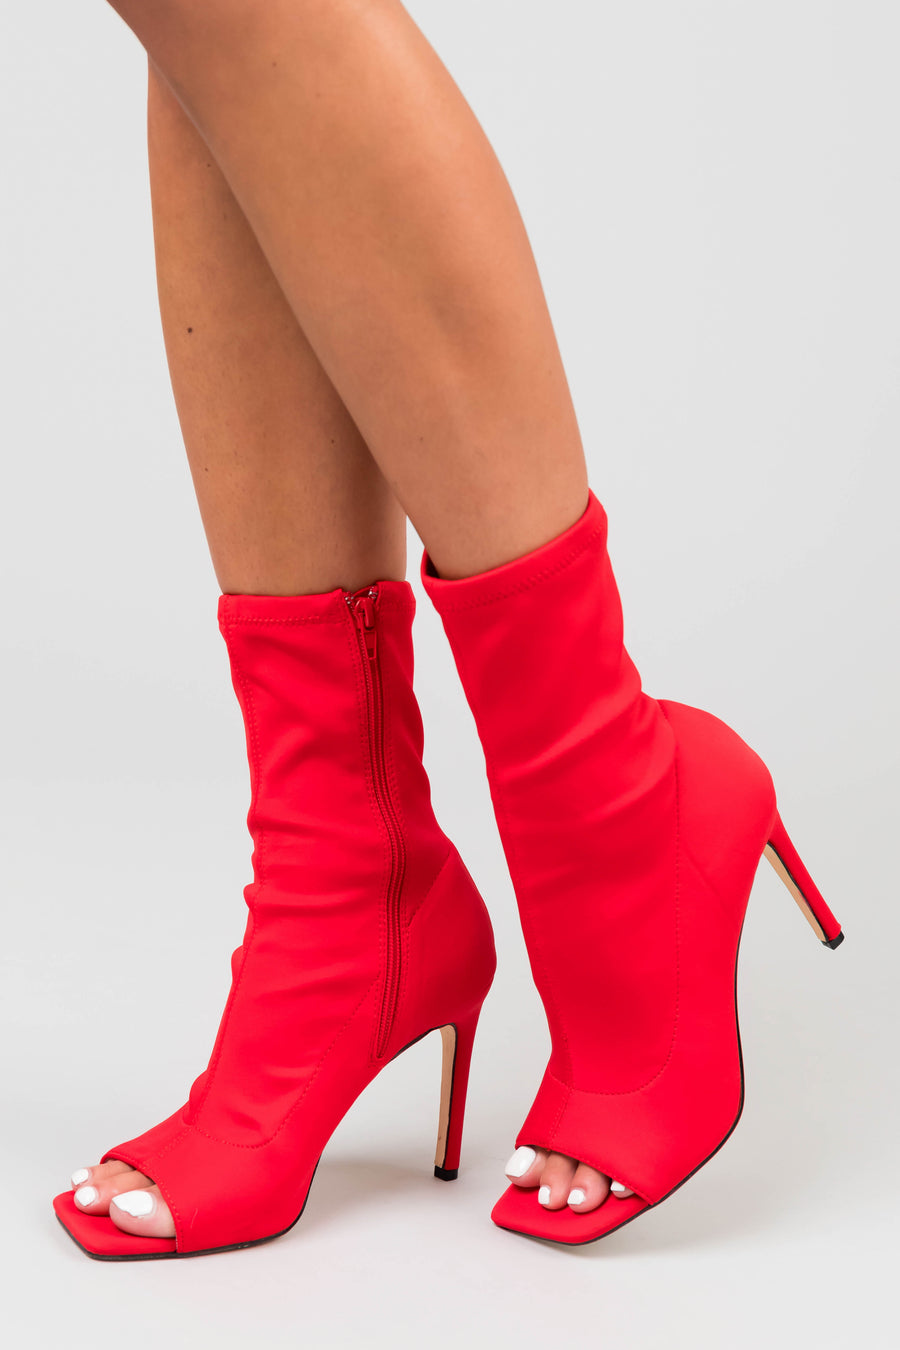 Scarlet Open Toe Stretchy Knit Stiletto Booties